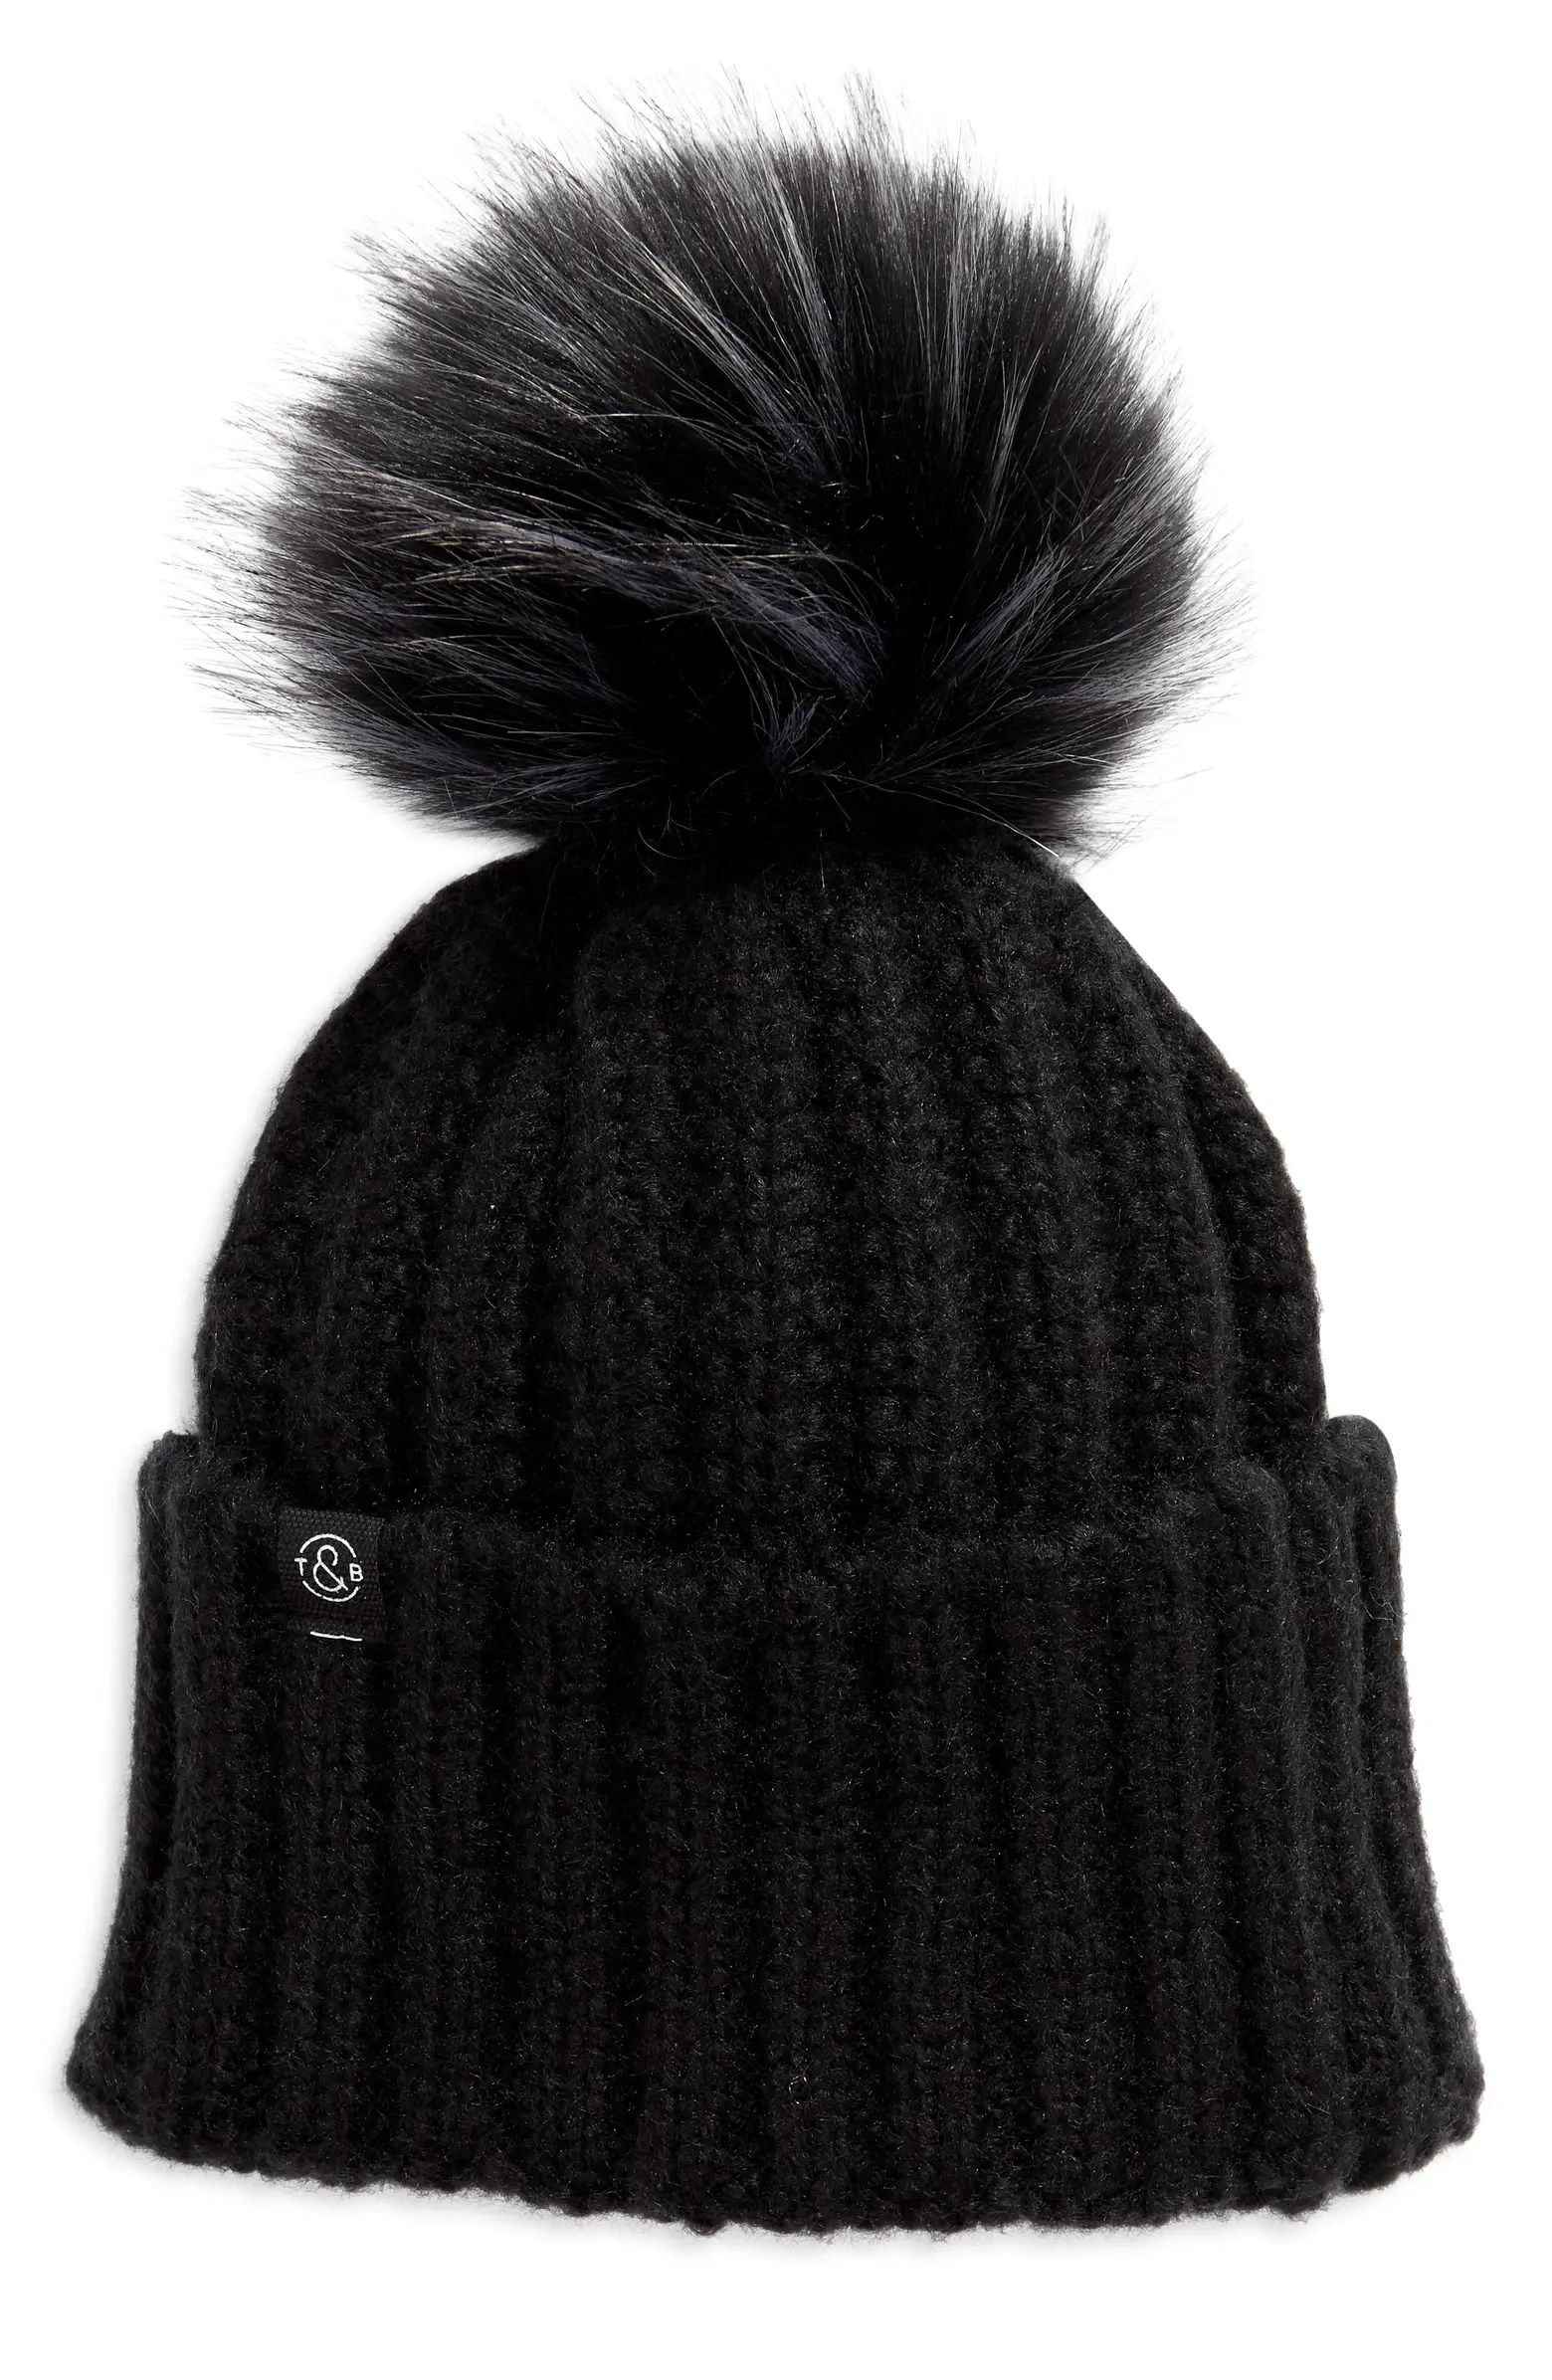 Cuffed Beanie with Faux Fur Pom | Nordstrom